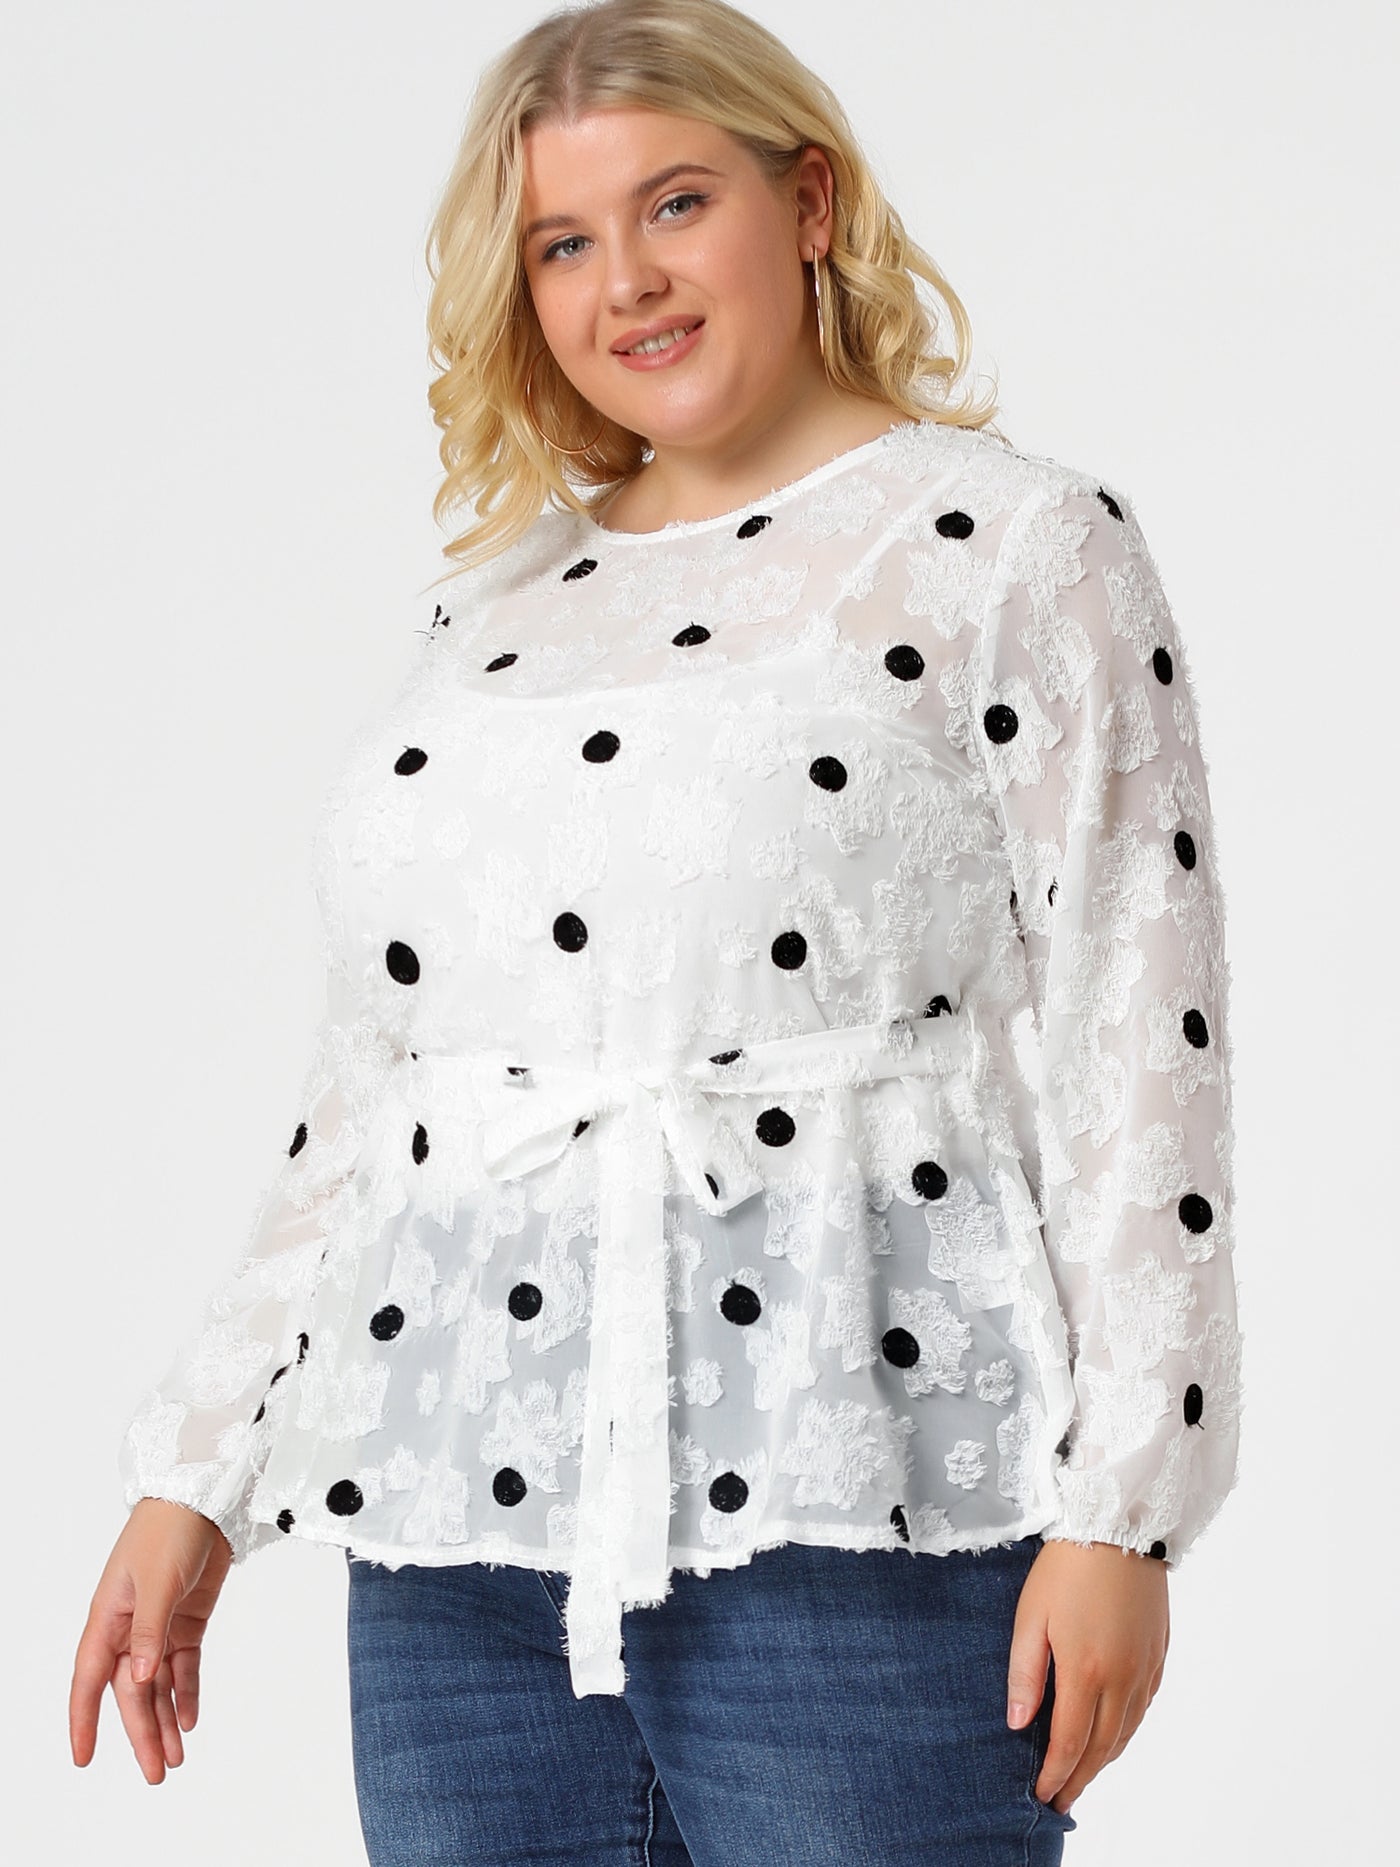 Bublédon Plus Size Belted Waisted Polka Dots Peplum Mesh Lace Top